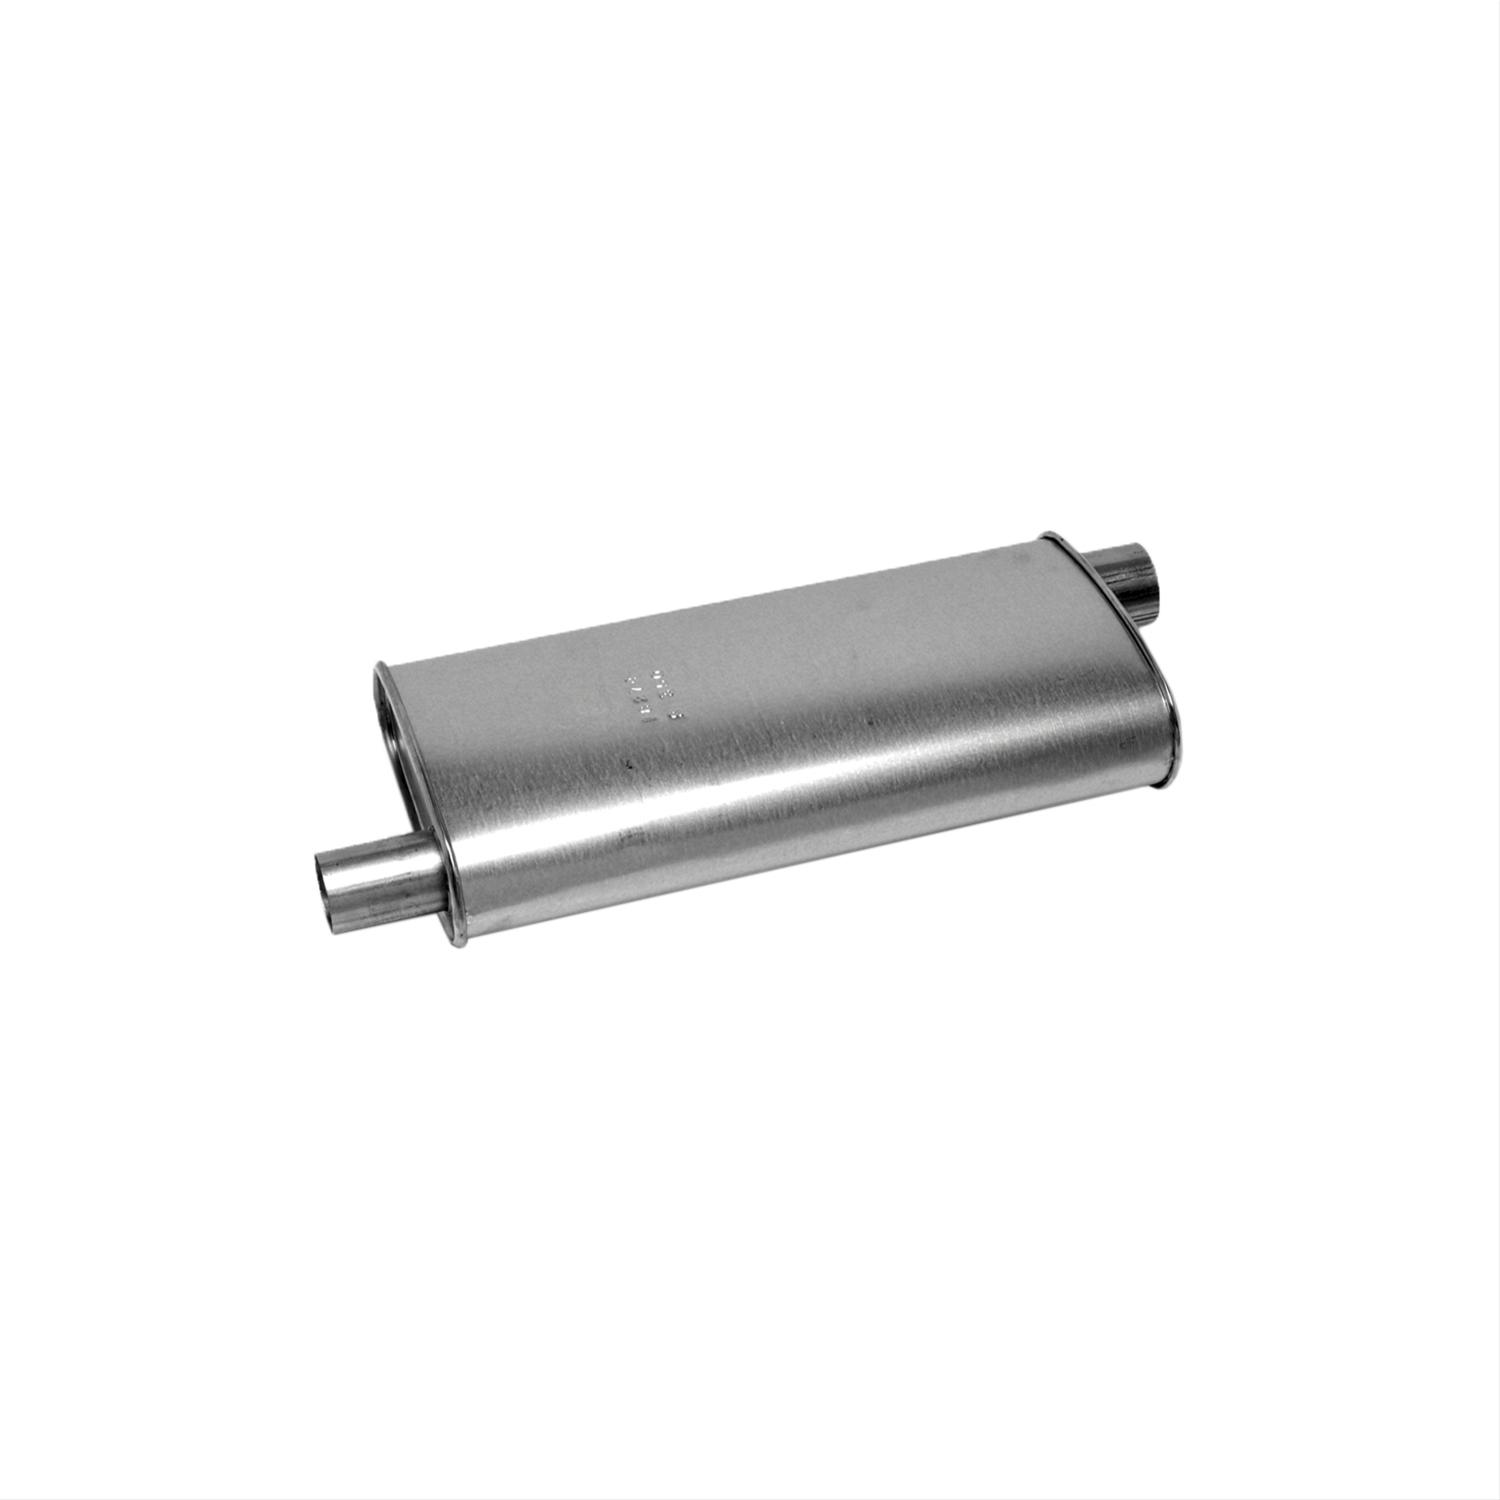 117." WB Walker 45454 Exhaust Tail Pipe-Flareside